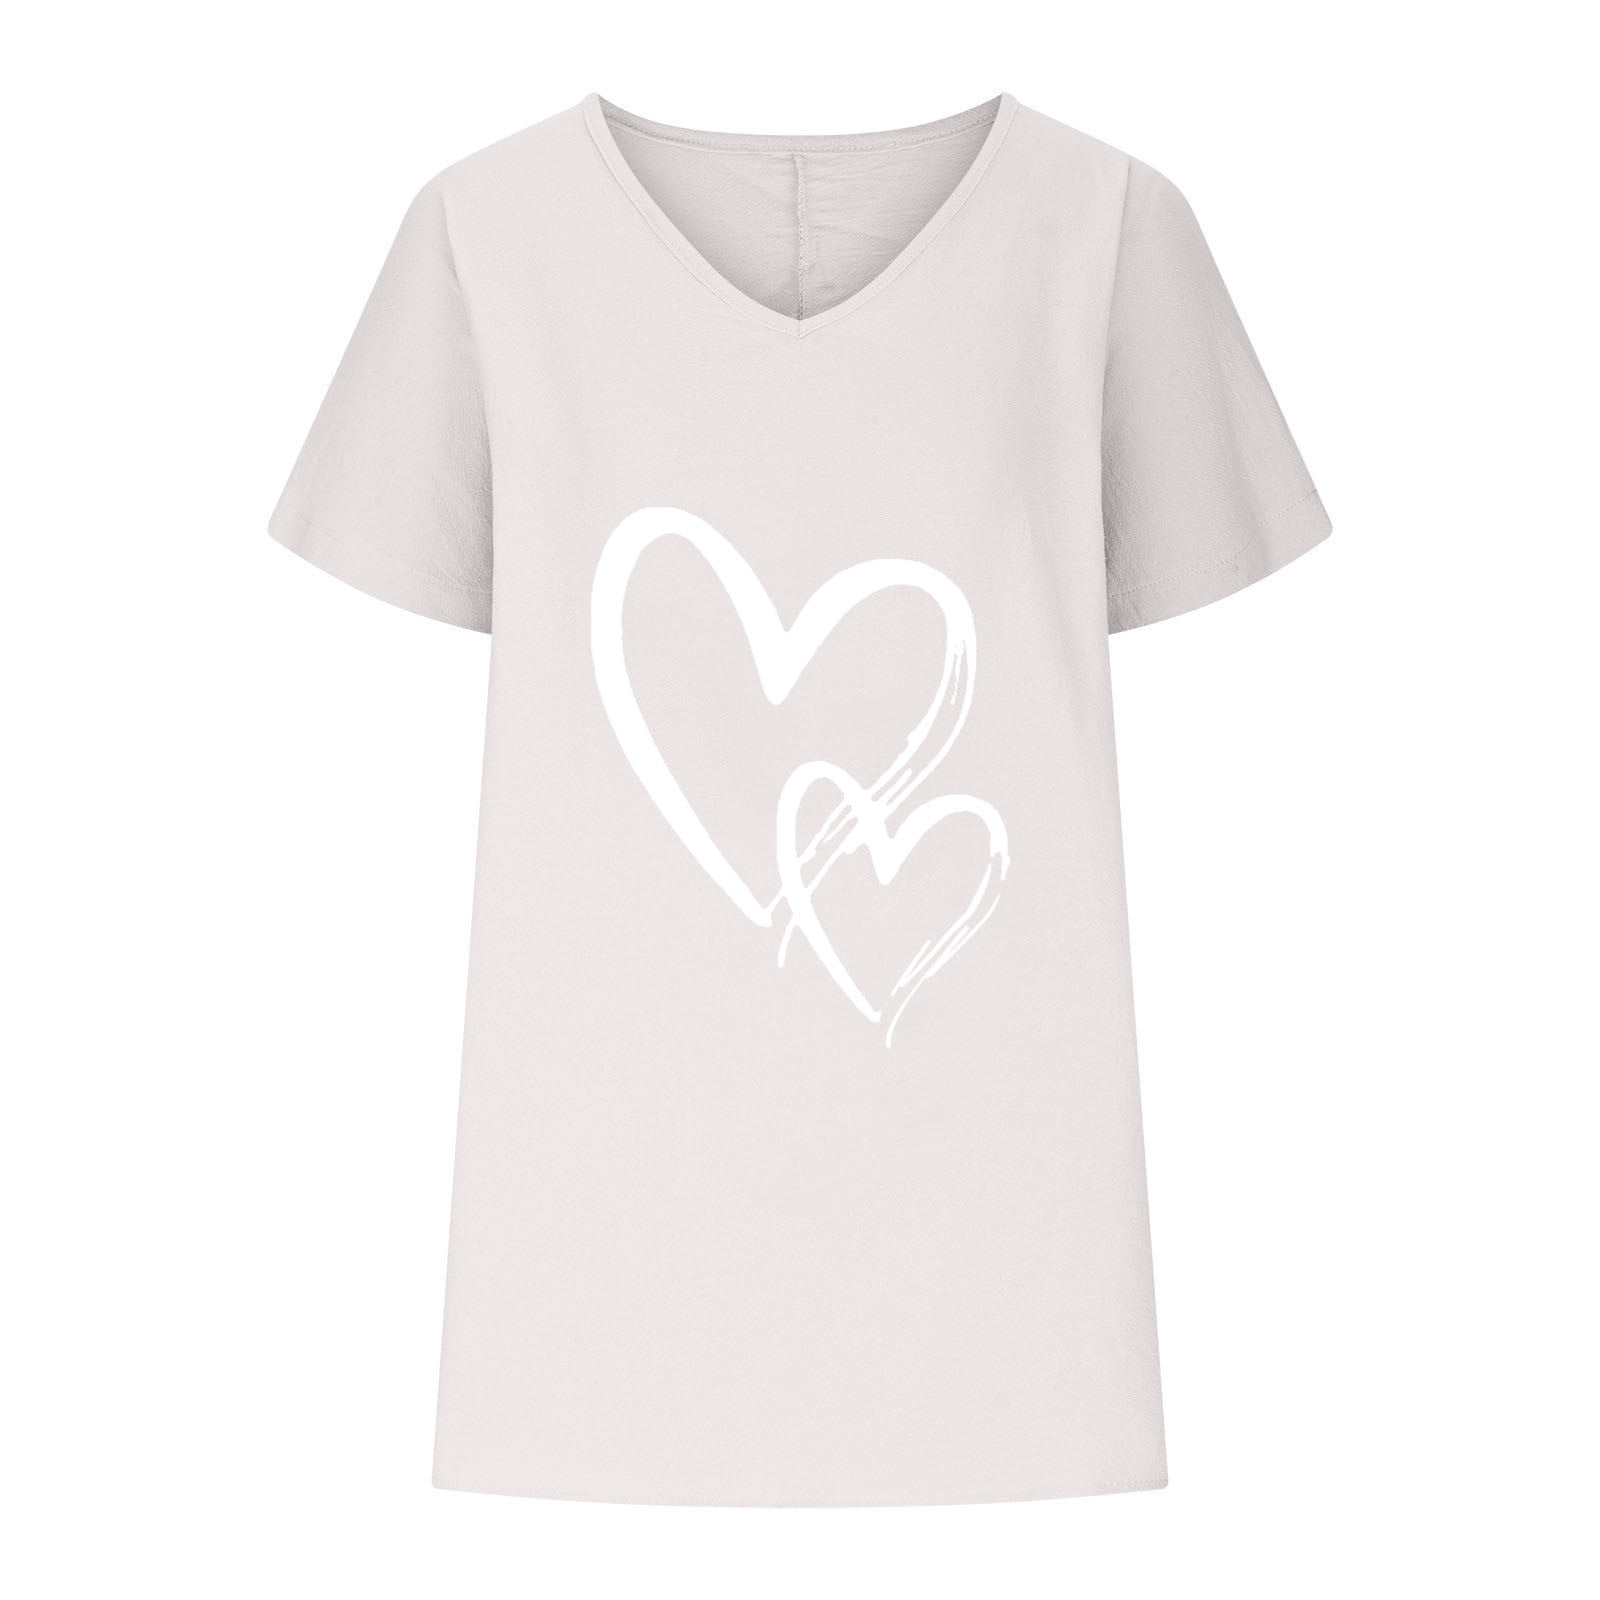 Shirts Clothing Cotton Womens 2023 Fit Relaxed V - Casual Trendy Womens Plus Comfy Blouse Olyvenn Heart Tees Tops Linen Short Summer T-Shirts Love Sleeve Neck Workout Flowy Print Black Size 12